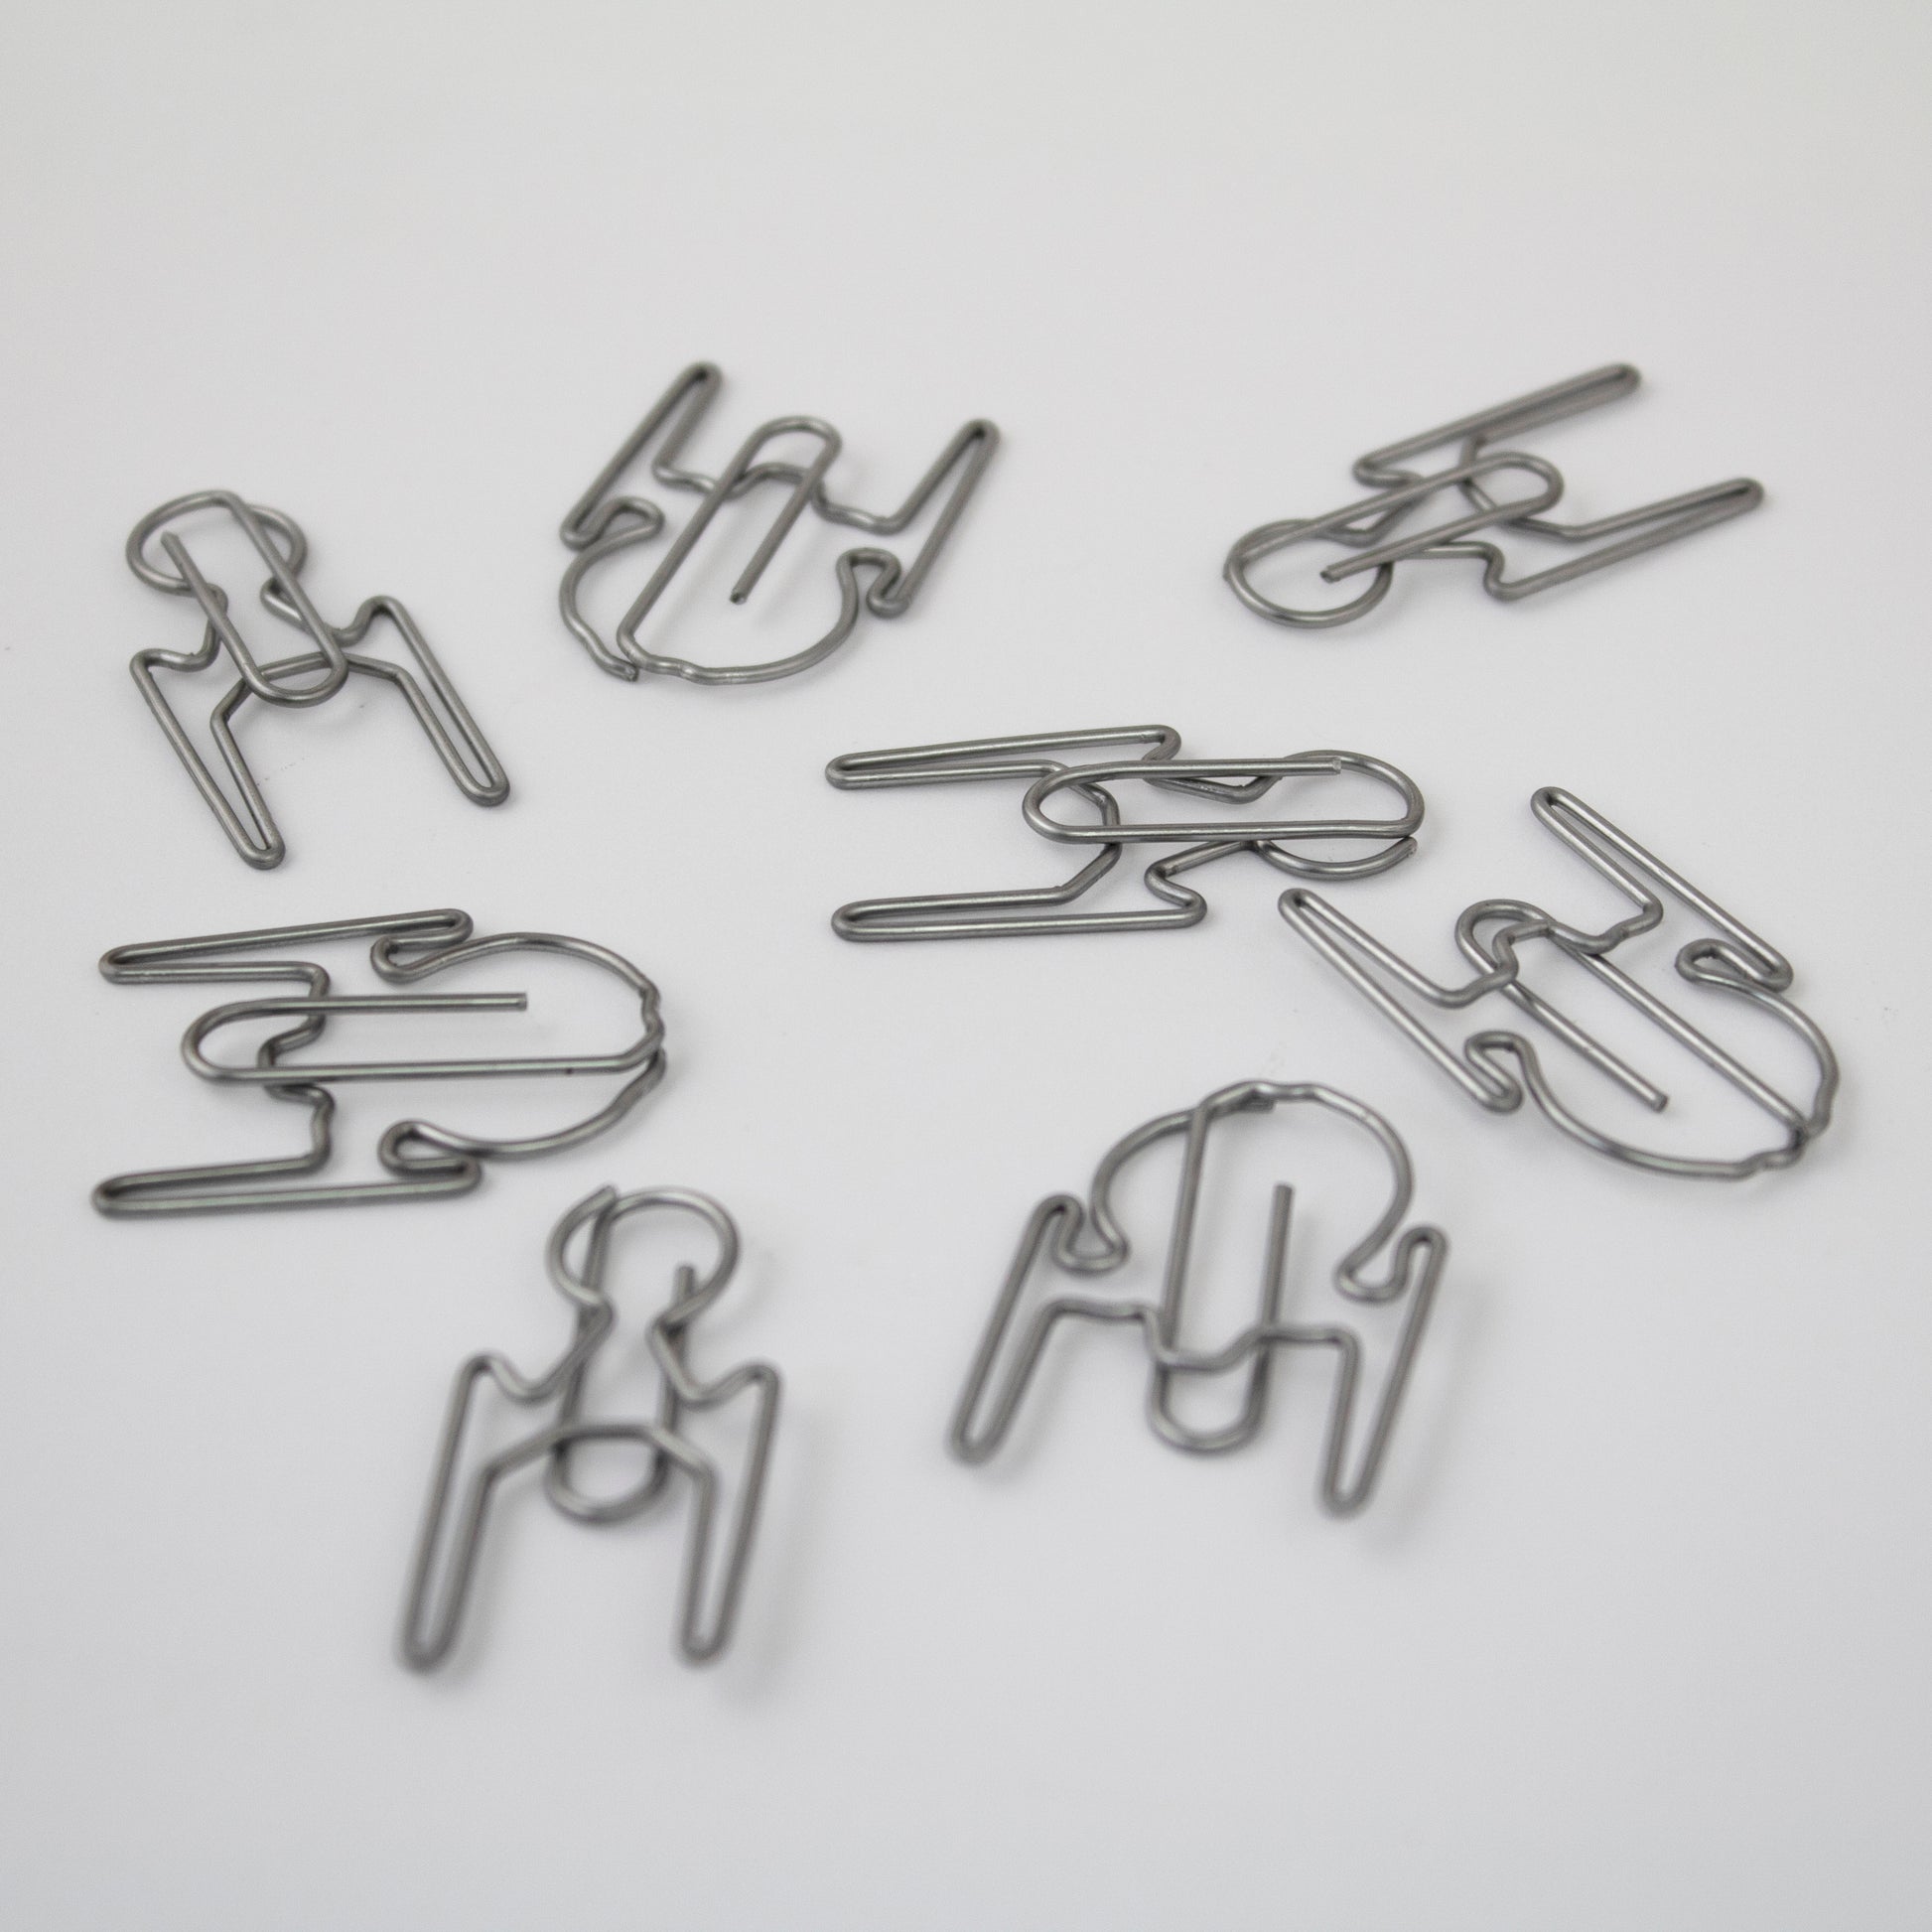 Star Trek Discovery Paper Clips - Icon Heroes 